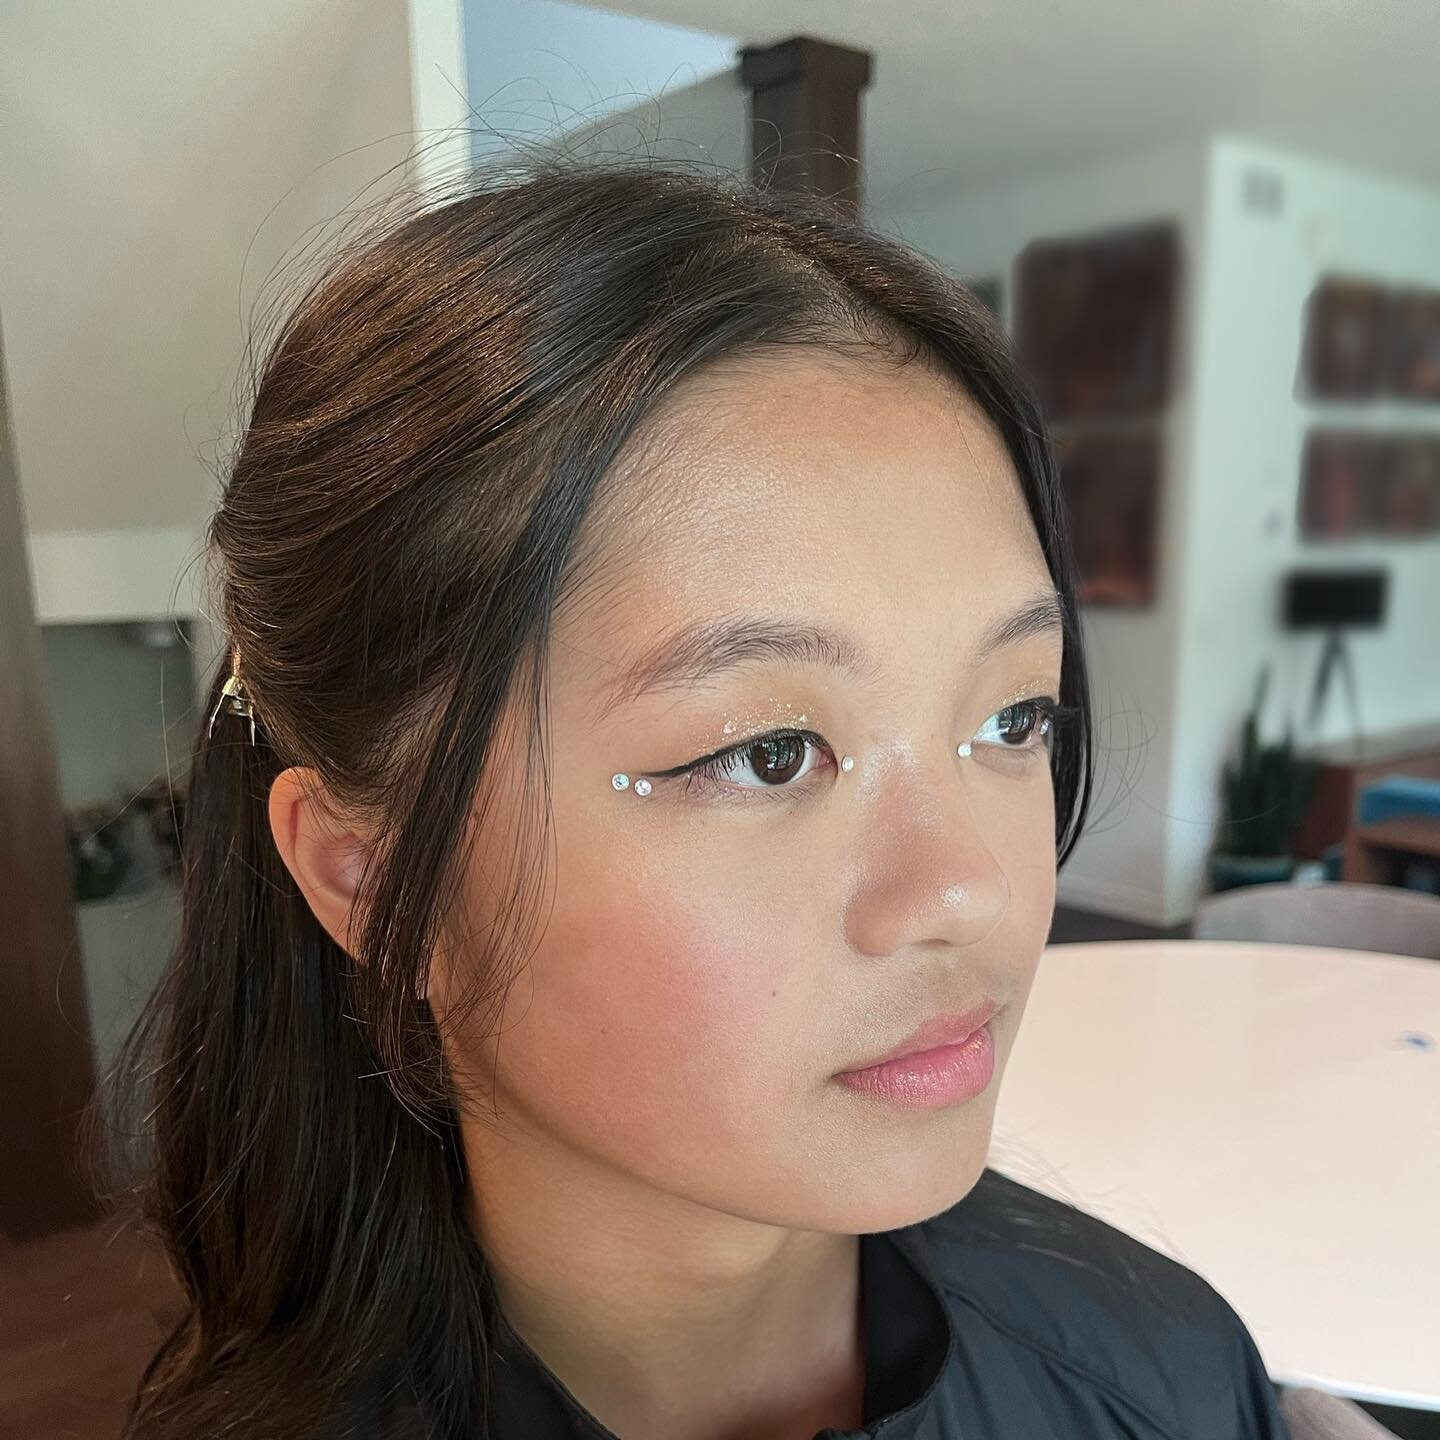 i had the honor of doing my nieces hair and makeup for her formal 🥲🥲
she&rsquo;s so big now, i remember when she was born and was the most peaceful baby in the world. 
also chee did her nails for her formal as well, it was fun being her glam squad 